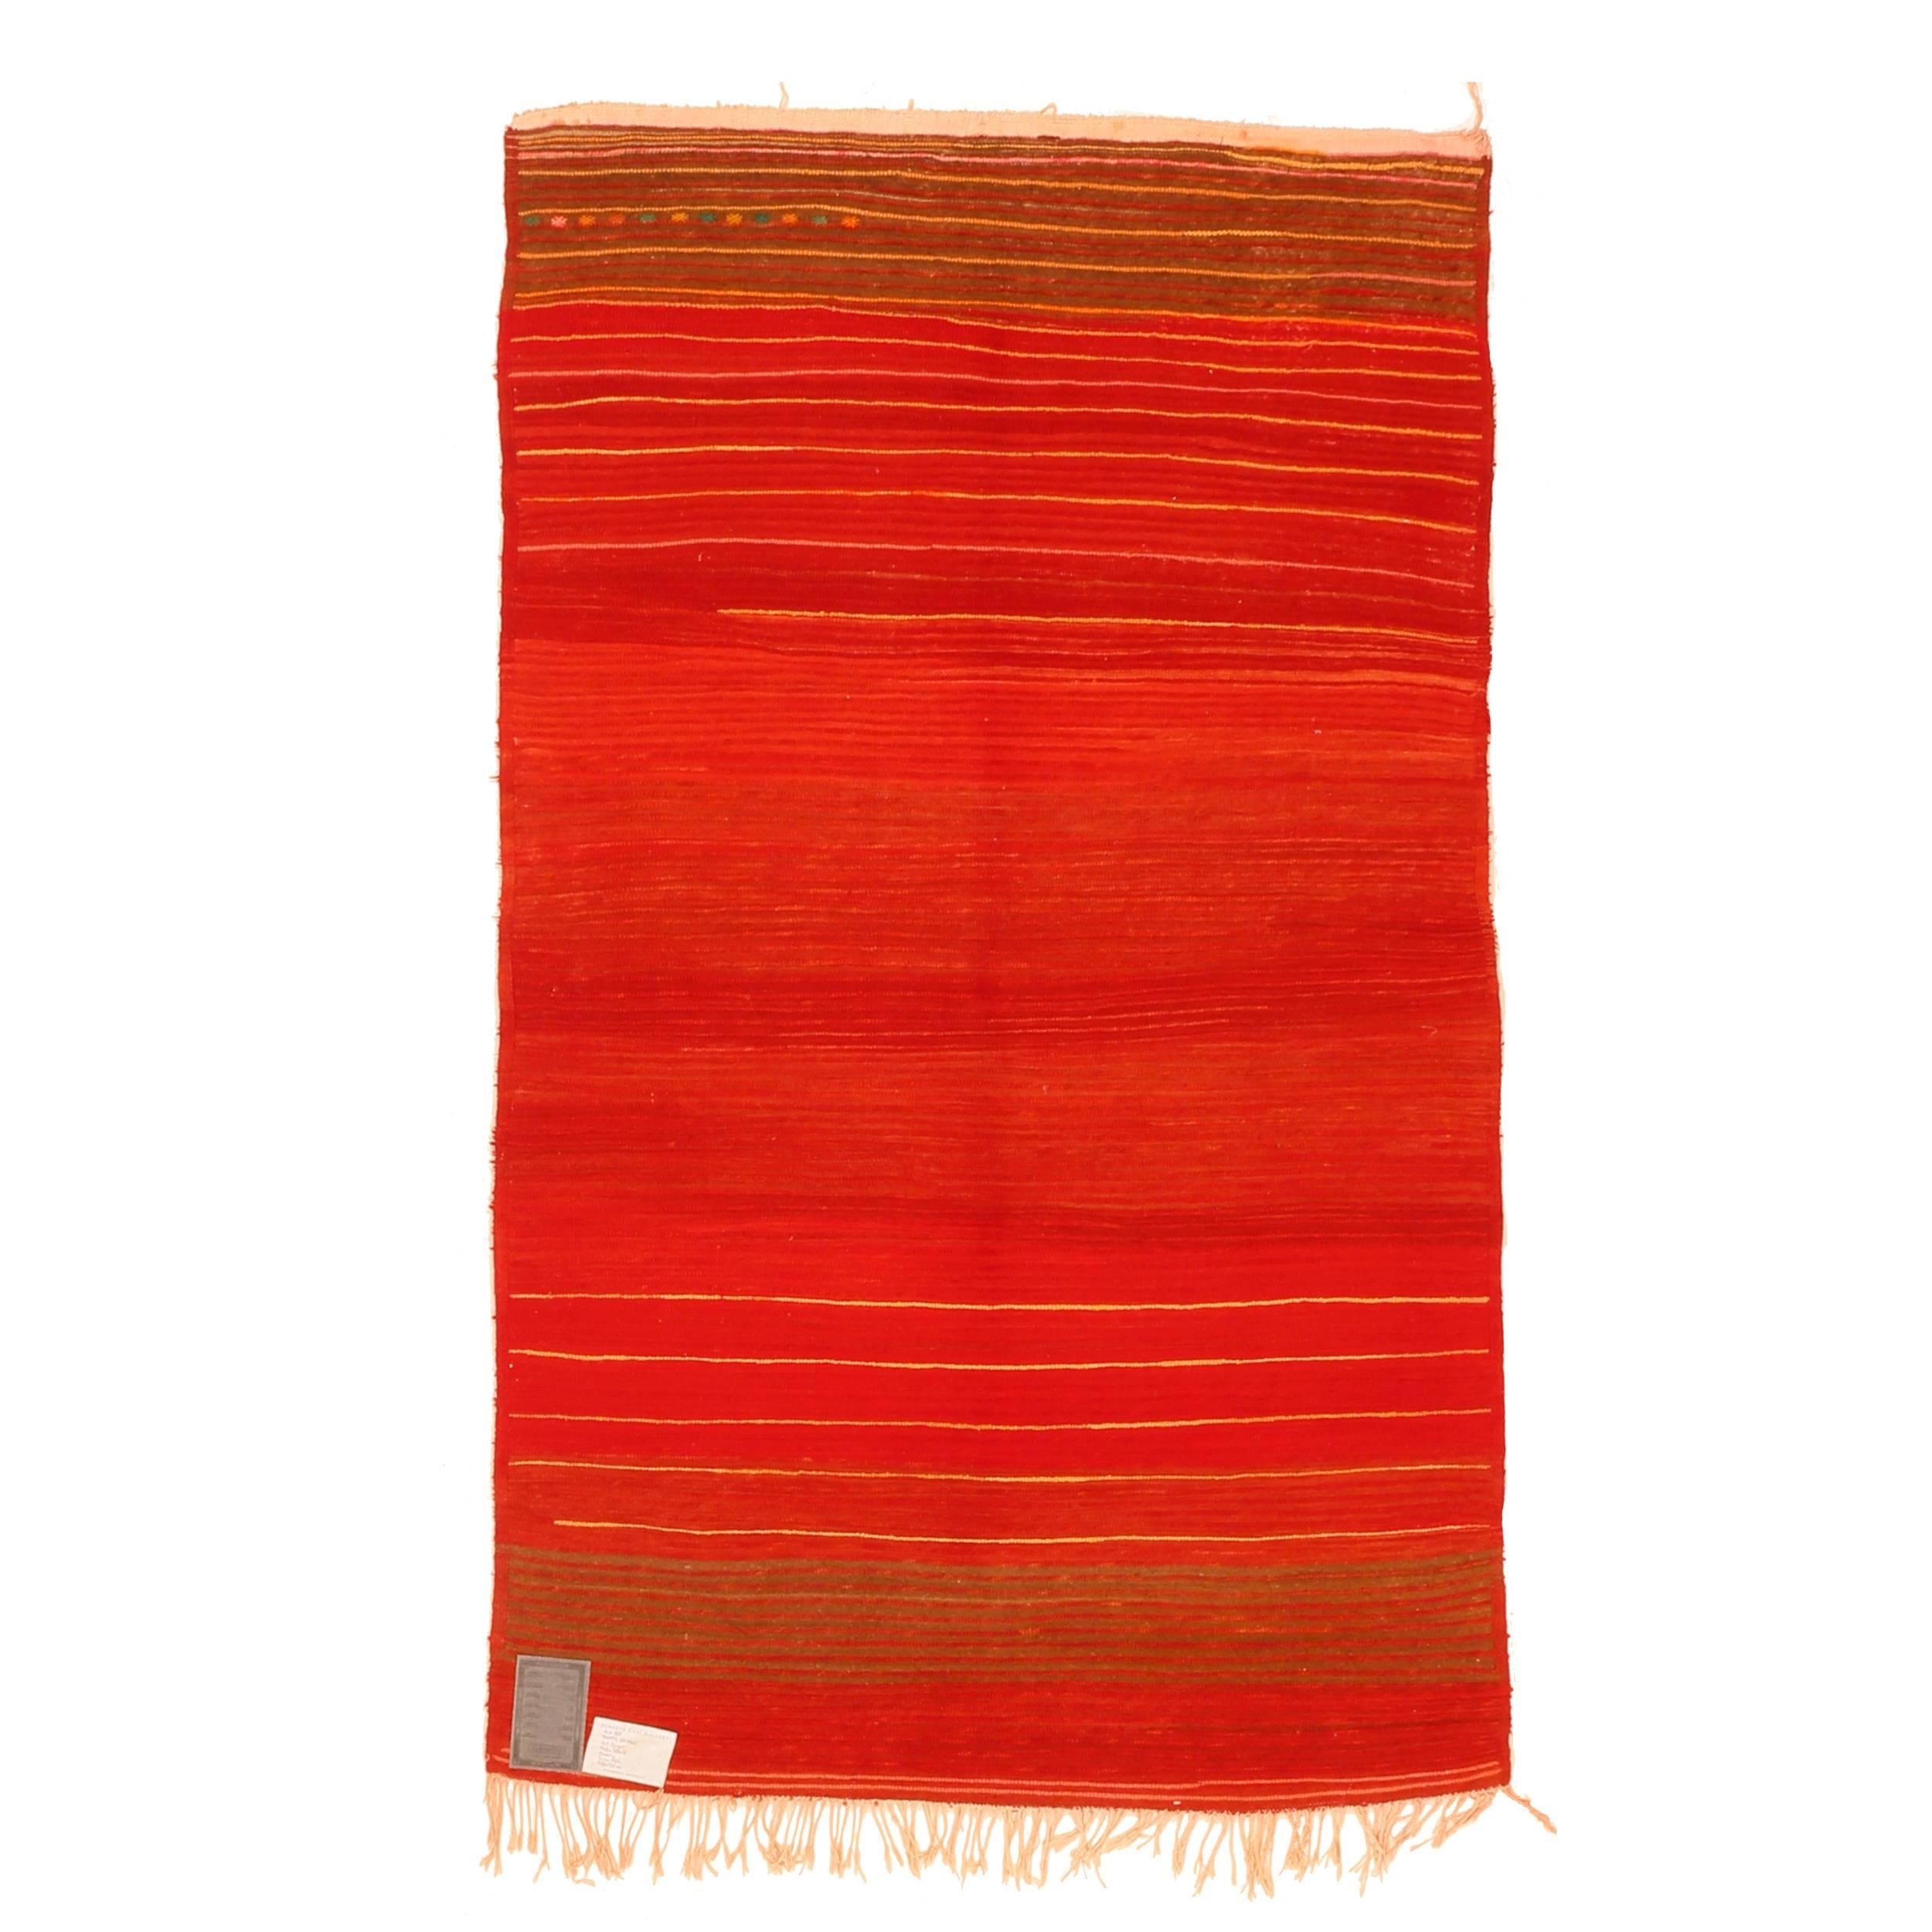 A rather unusual Berber rug from the Ait Sgogou tribe, located in the Moroccan Middle Atlas, distinguished by a rich red open field embellished at both ends by contorting horizontal lines in the shades of yellow, orange and rose. The end skirts are